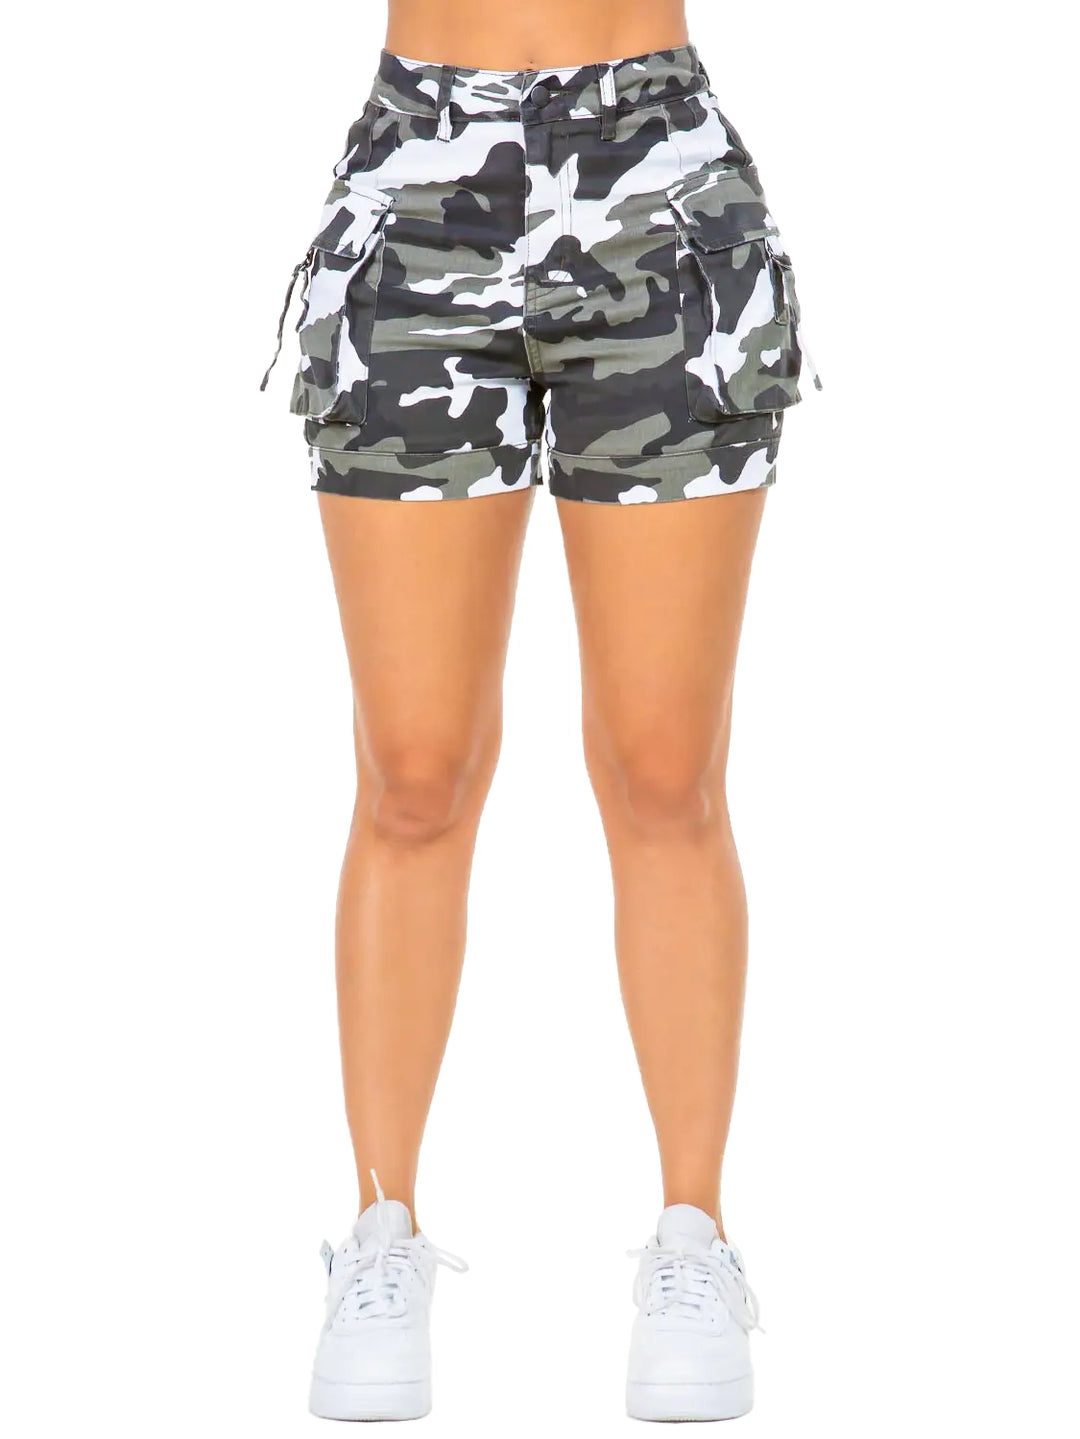 a woman wearing shorts with a camouflage print